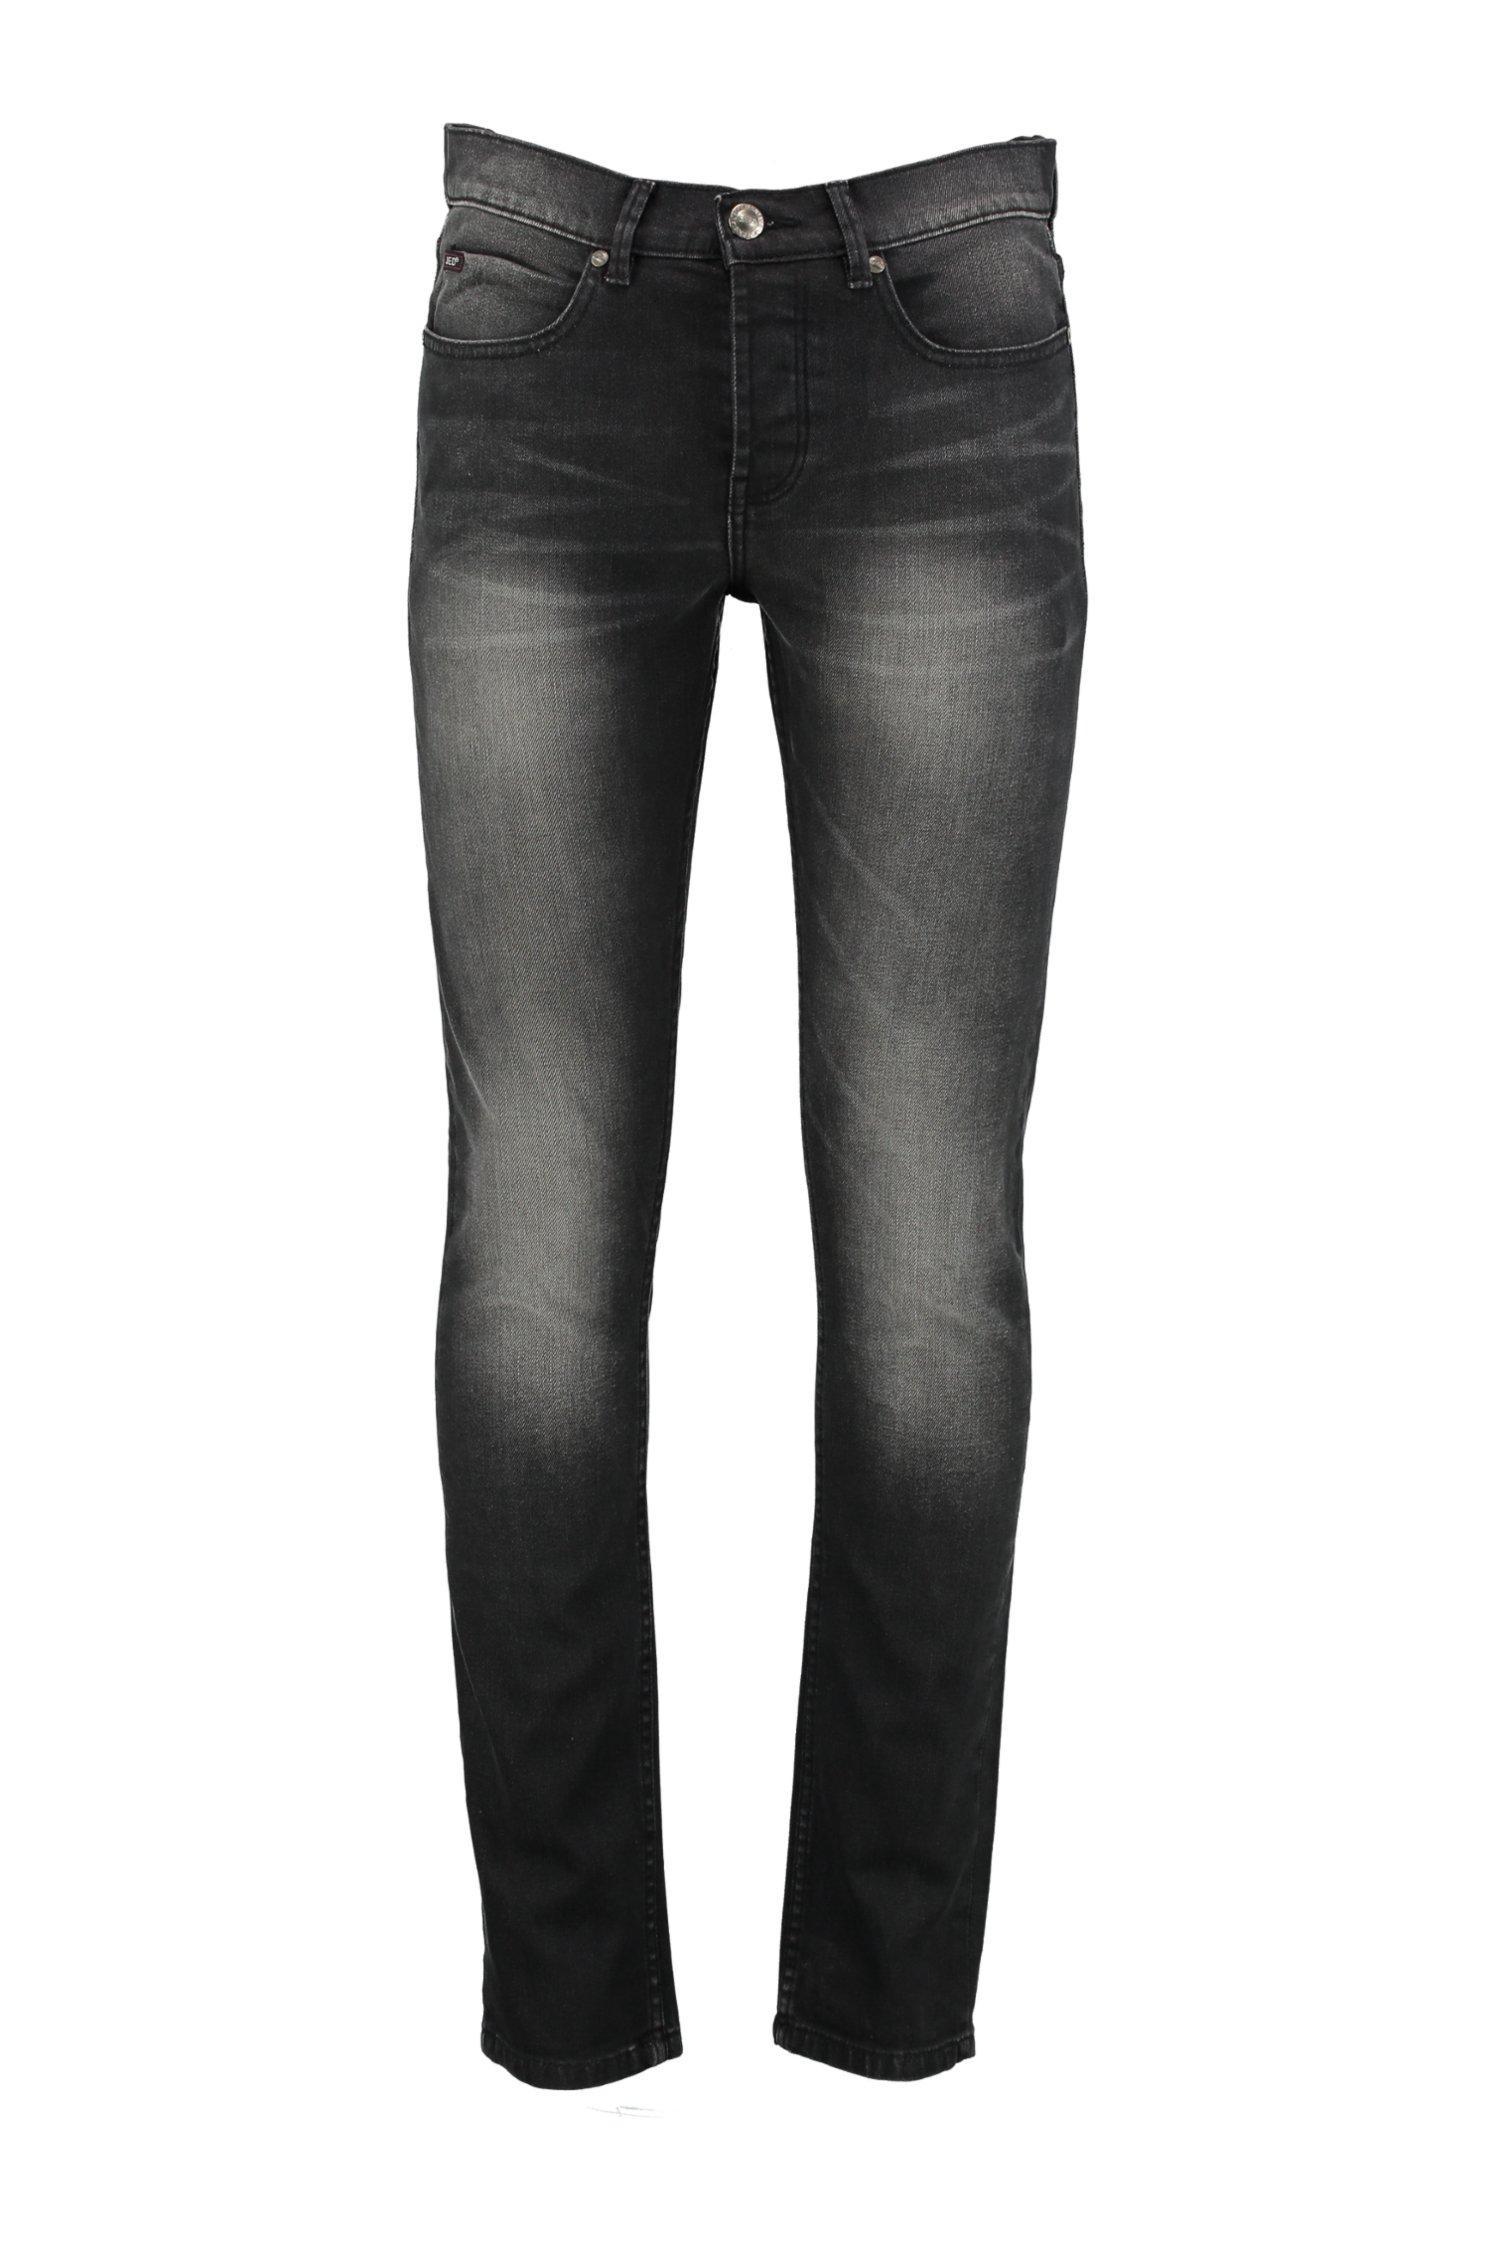 Lyst - Boohoo Slim Fit Charcoal Jeans With Sandblasting for Men